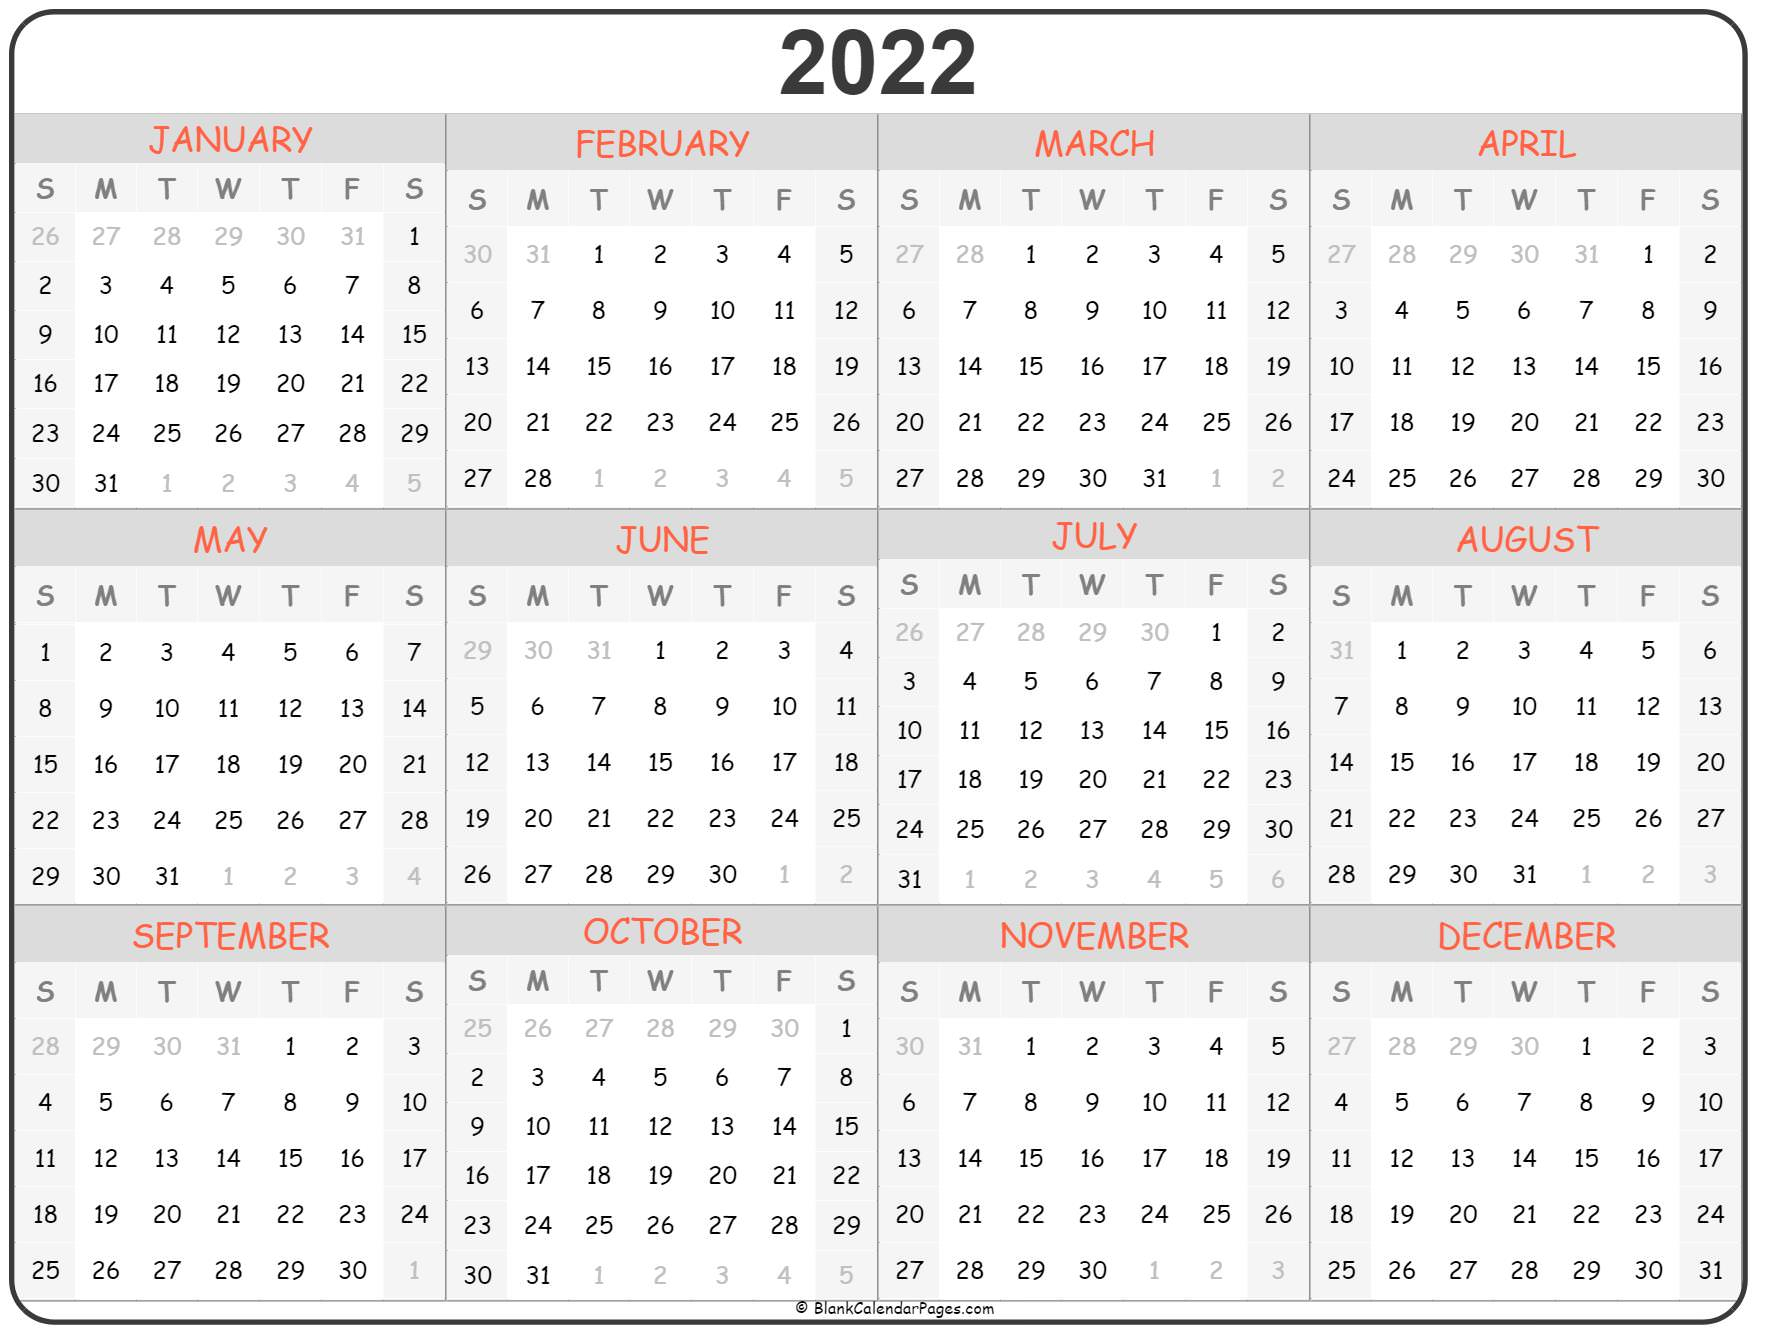 2022 Year Calendar | Yearly Printable inside Usmc Holiday Schedule 2022